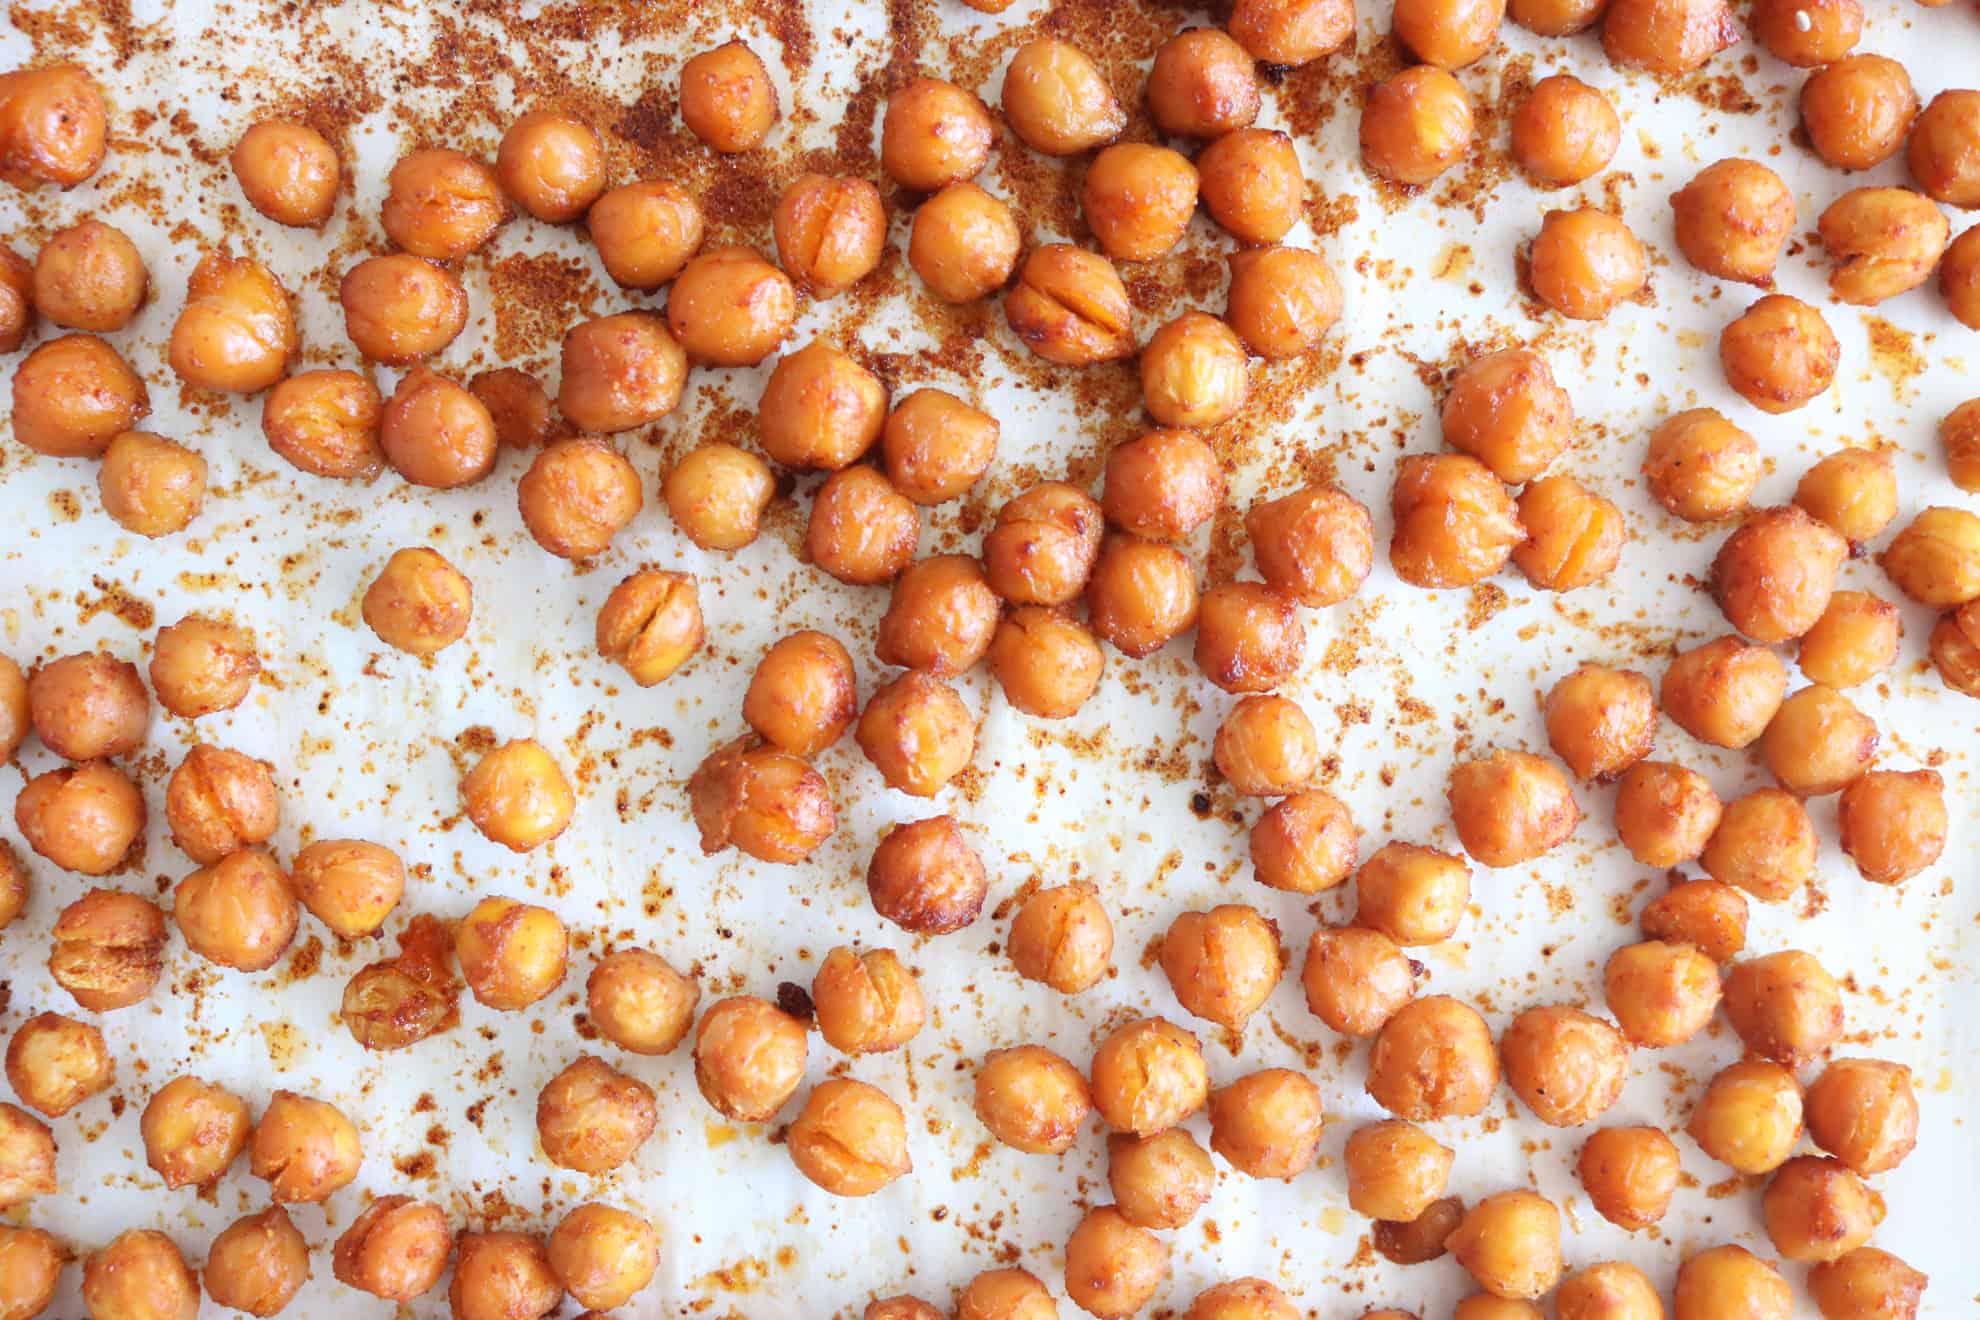 Toss the chickpeas with avocado oil paprika, chili powder, and sea salt. Transfer them to a lined baking sheet and roast in the oven for 15 minutes.